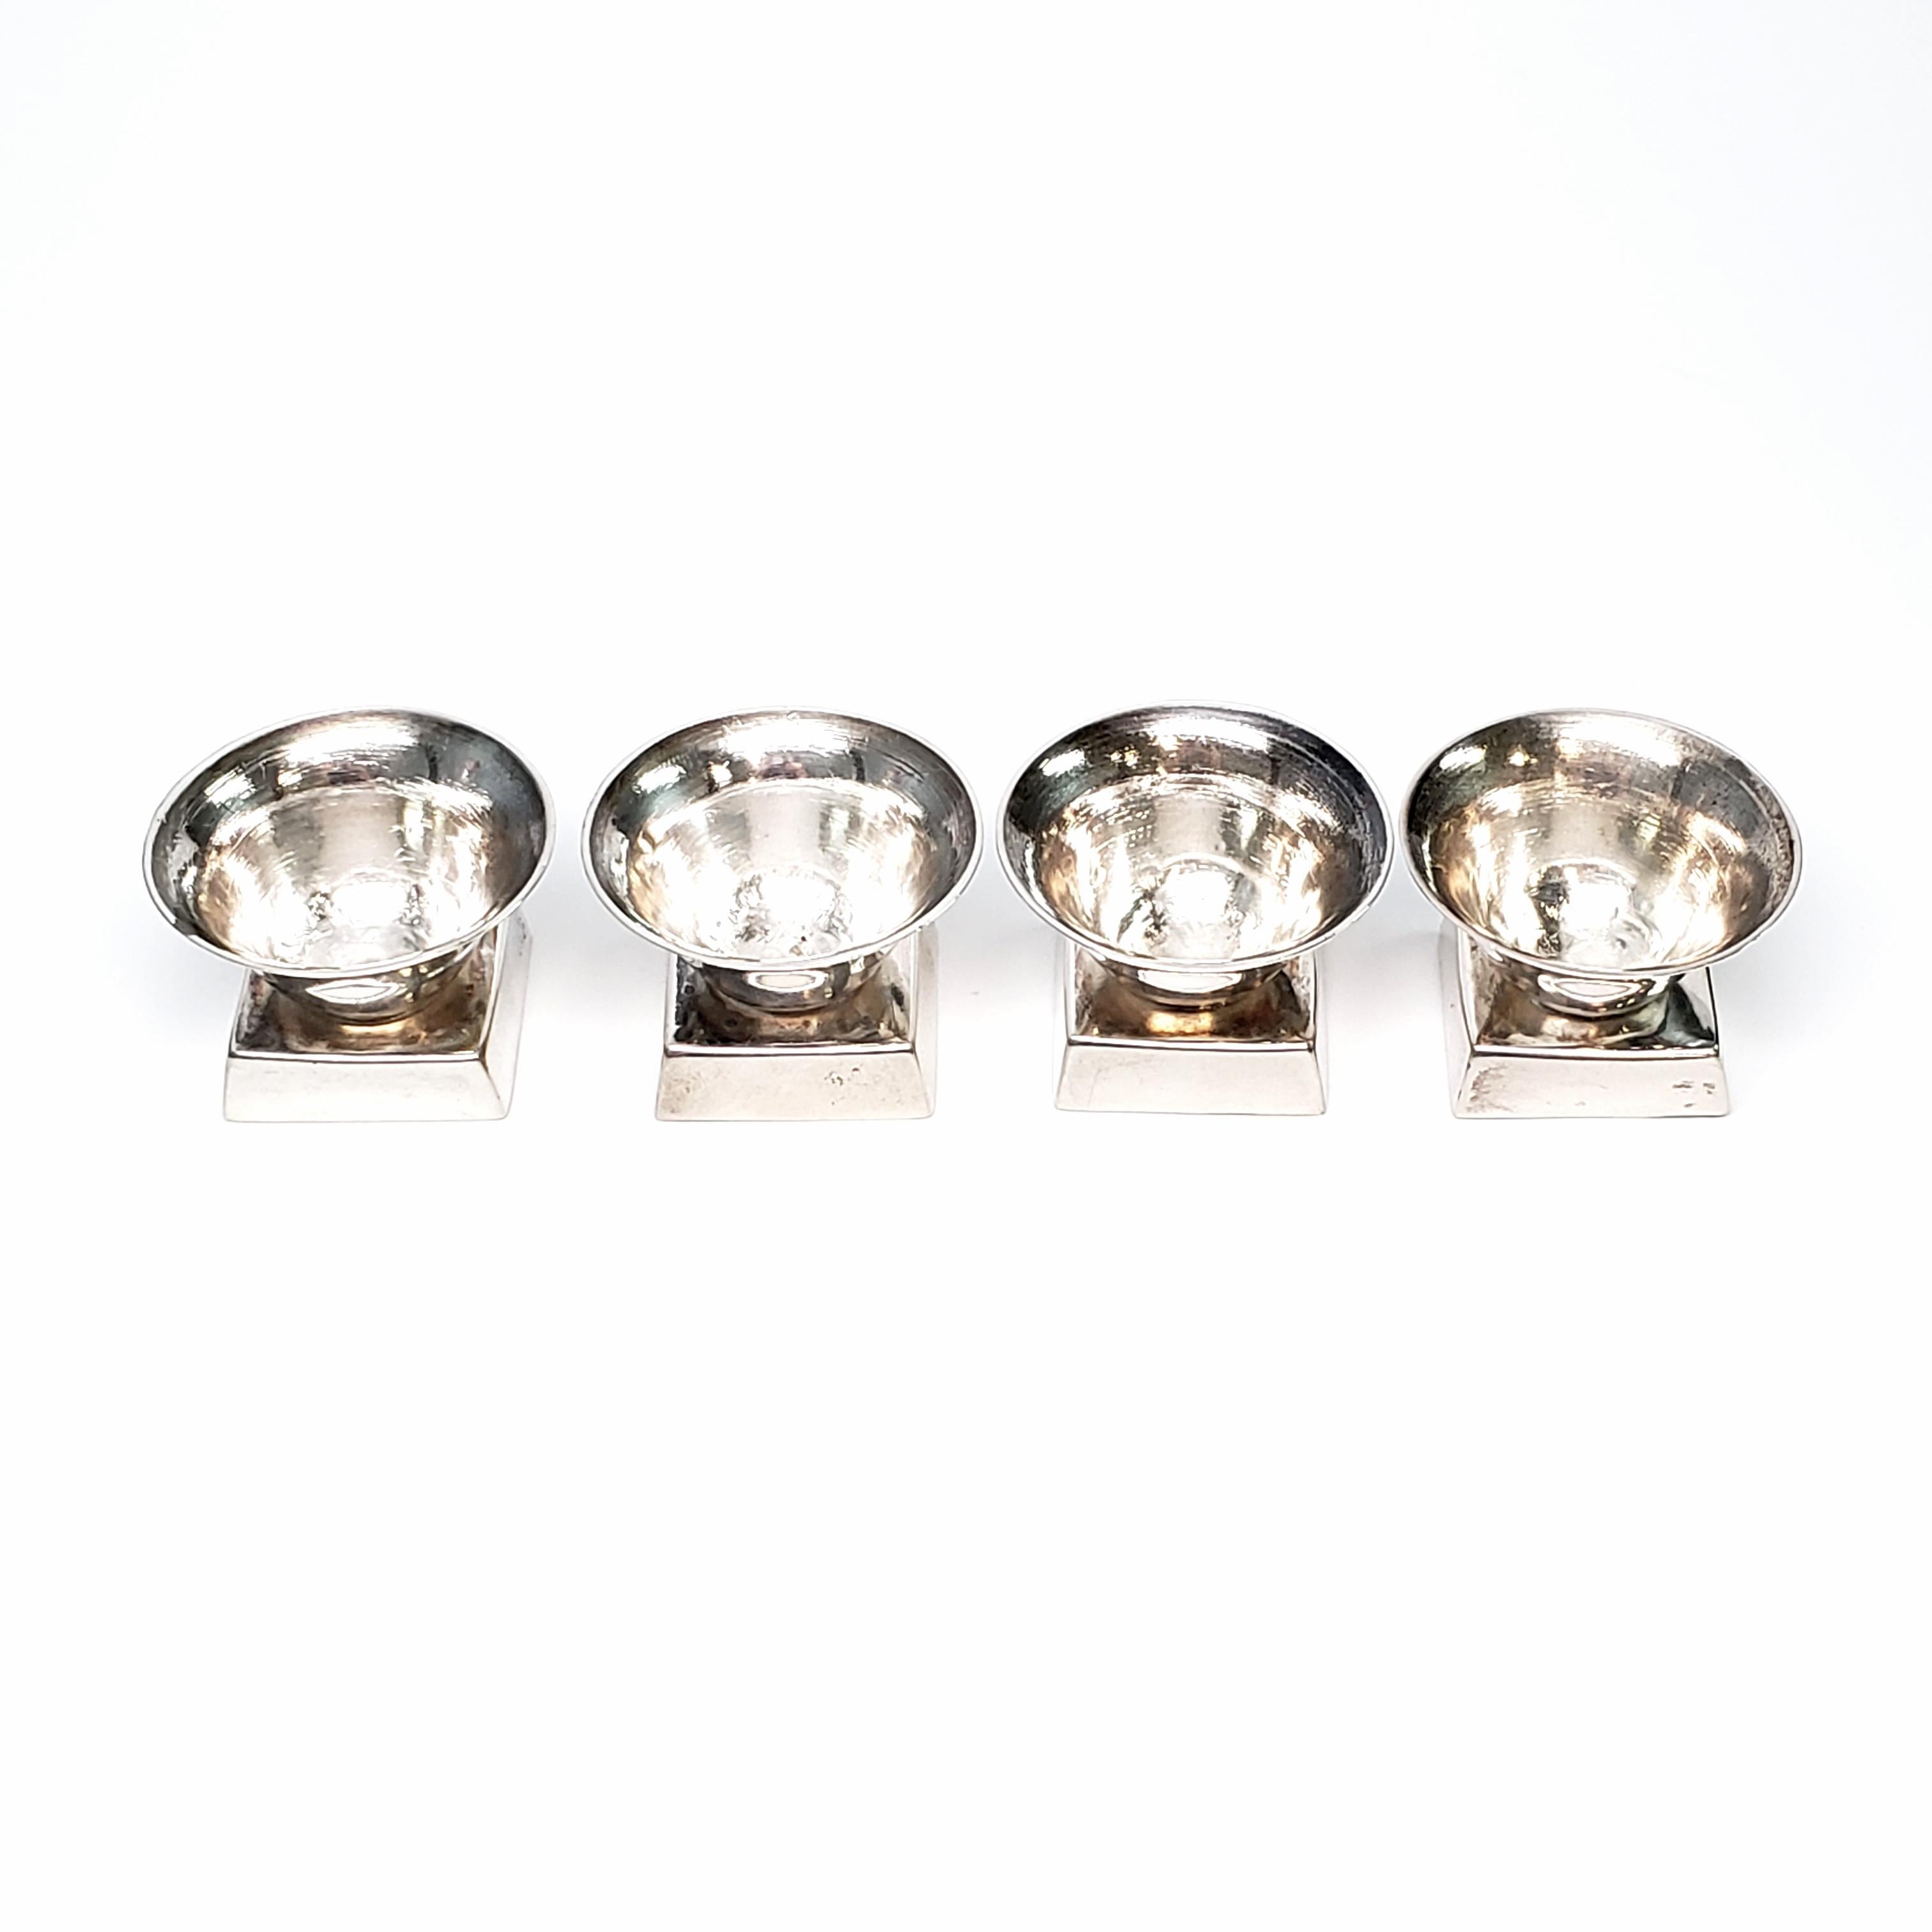 Set of 4 Taxco Mexico William Spratling sterling silver salt cellars, circa 1939-1940.

Salt cellars feature round bowls on a square pedestal base.

Measures approximate 1 1/2